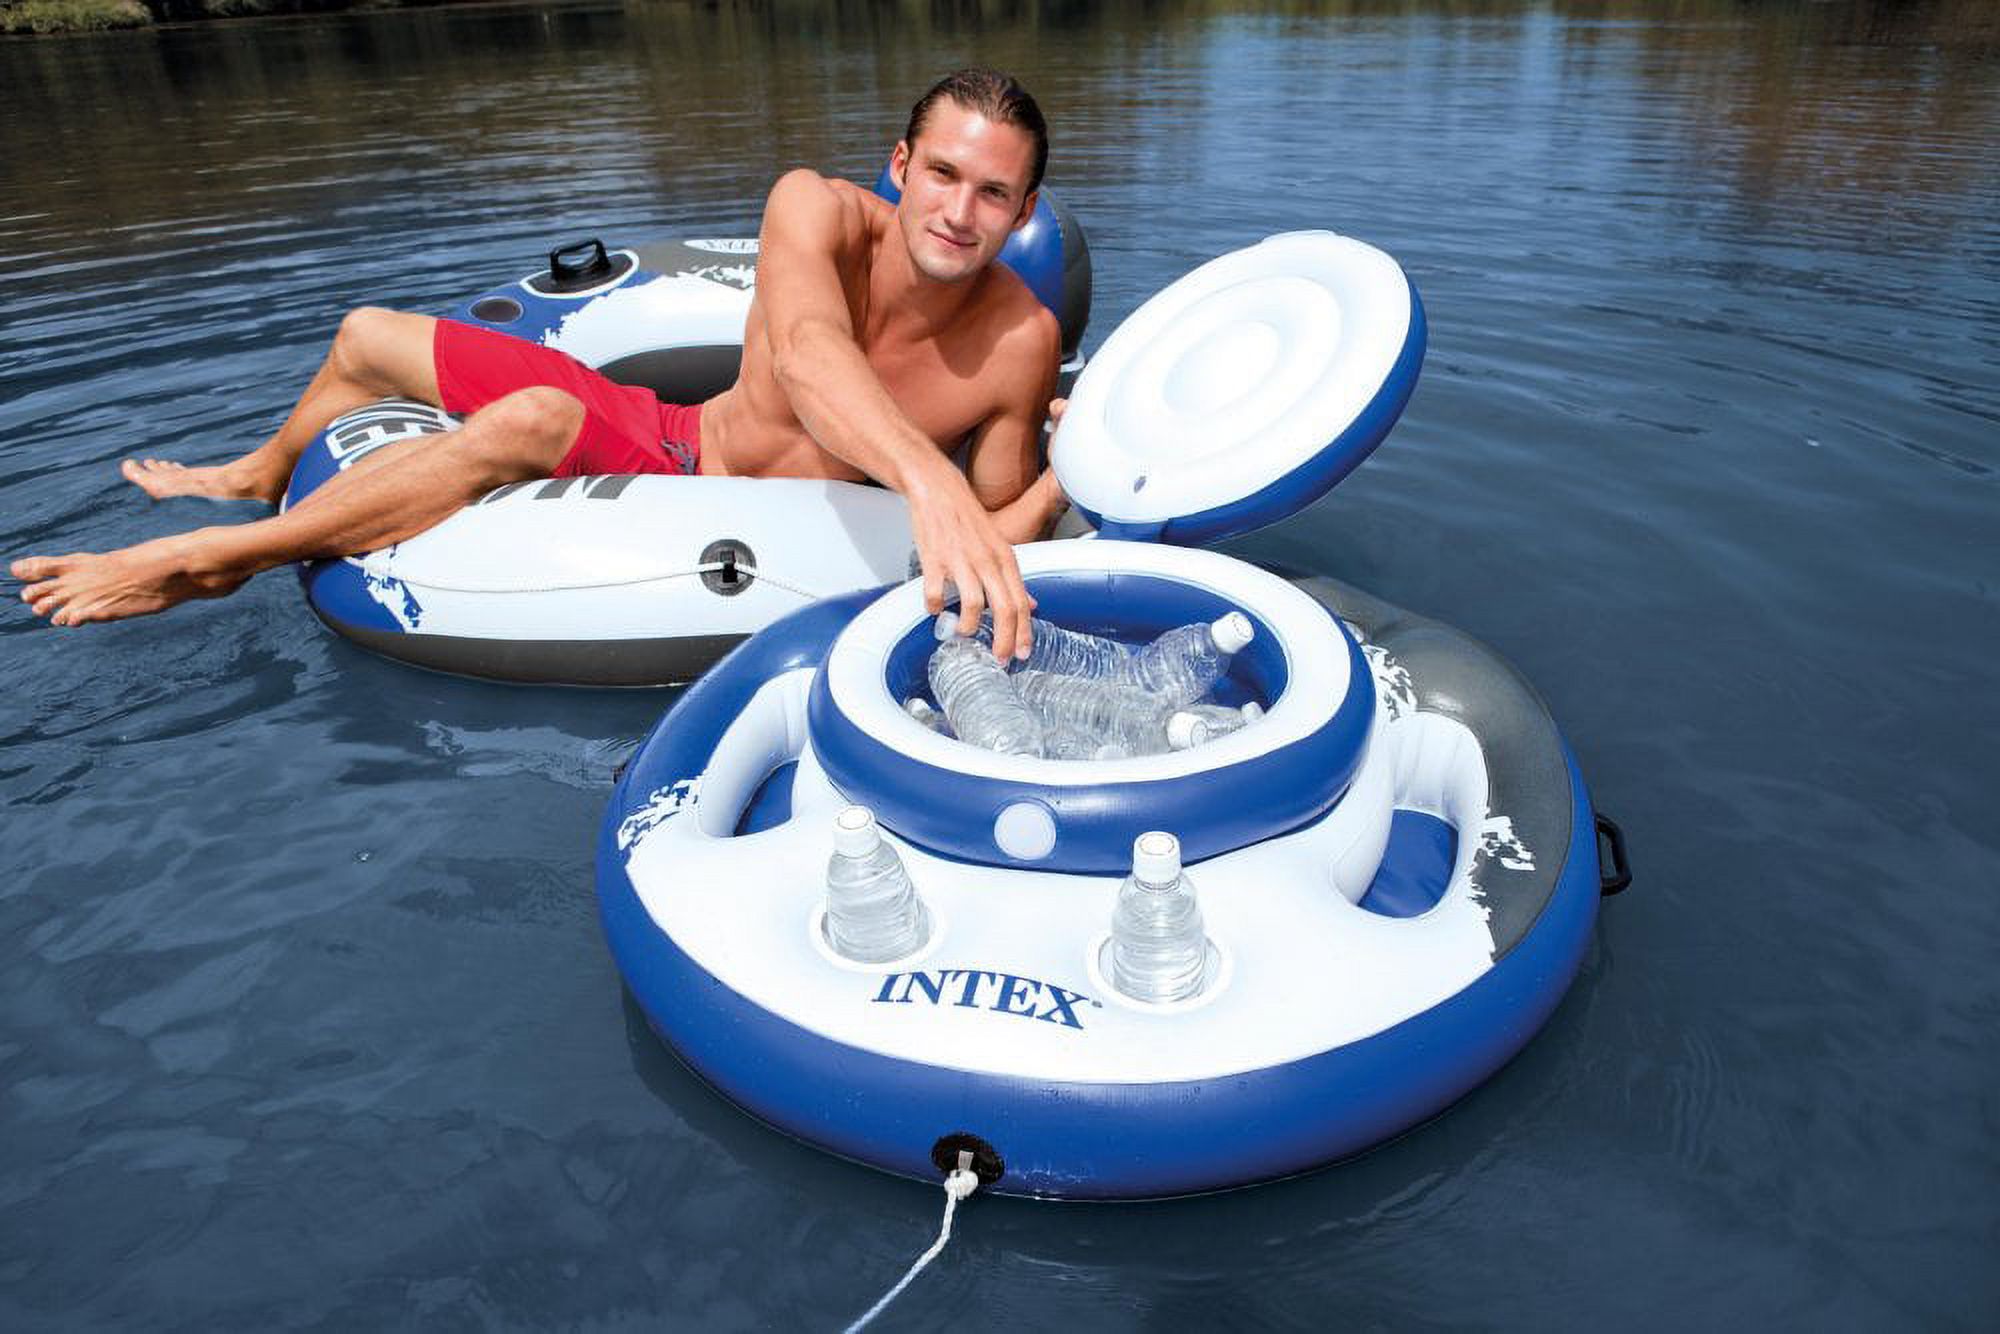 Intex Mega Chill Inflatable Float For Water Use - image 5 of 6